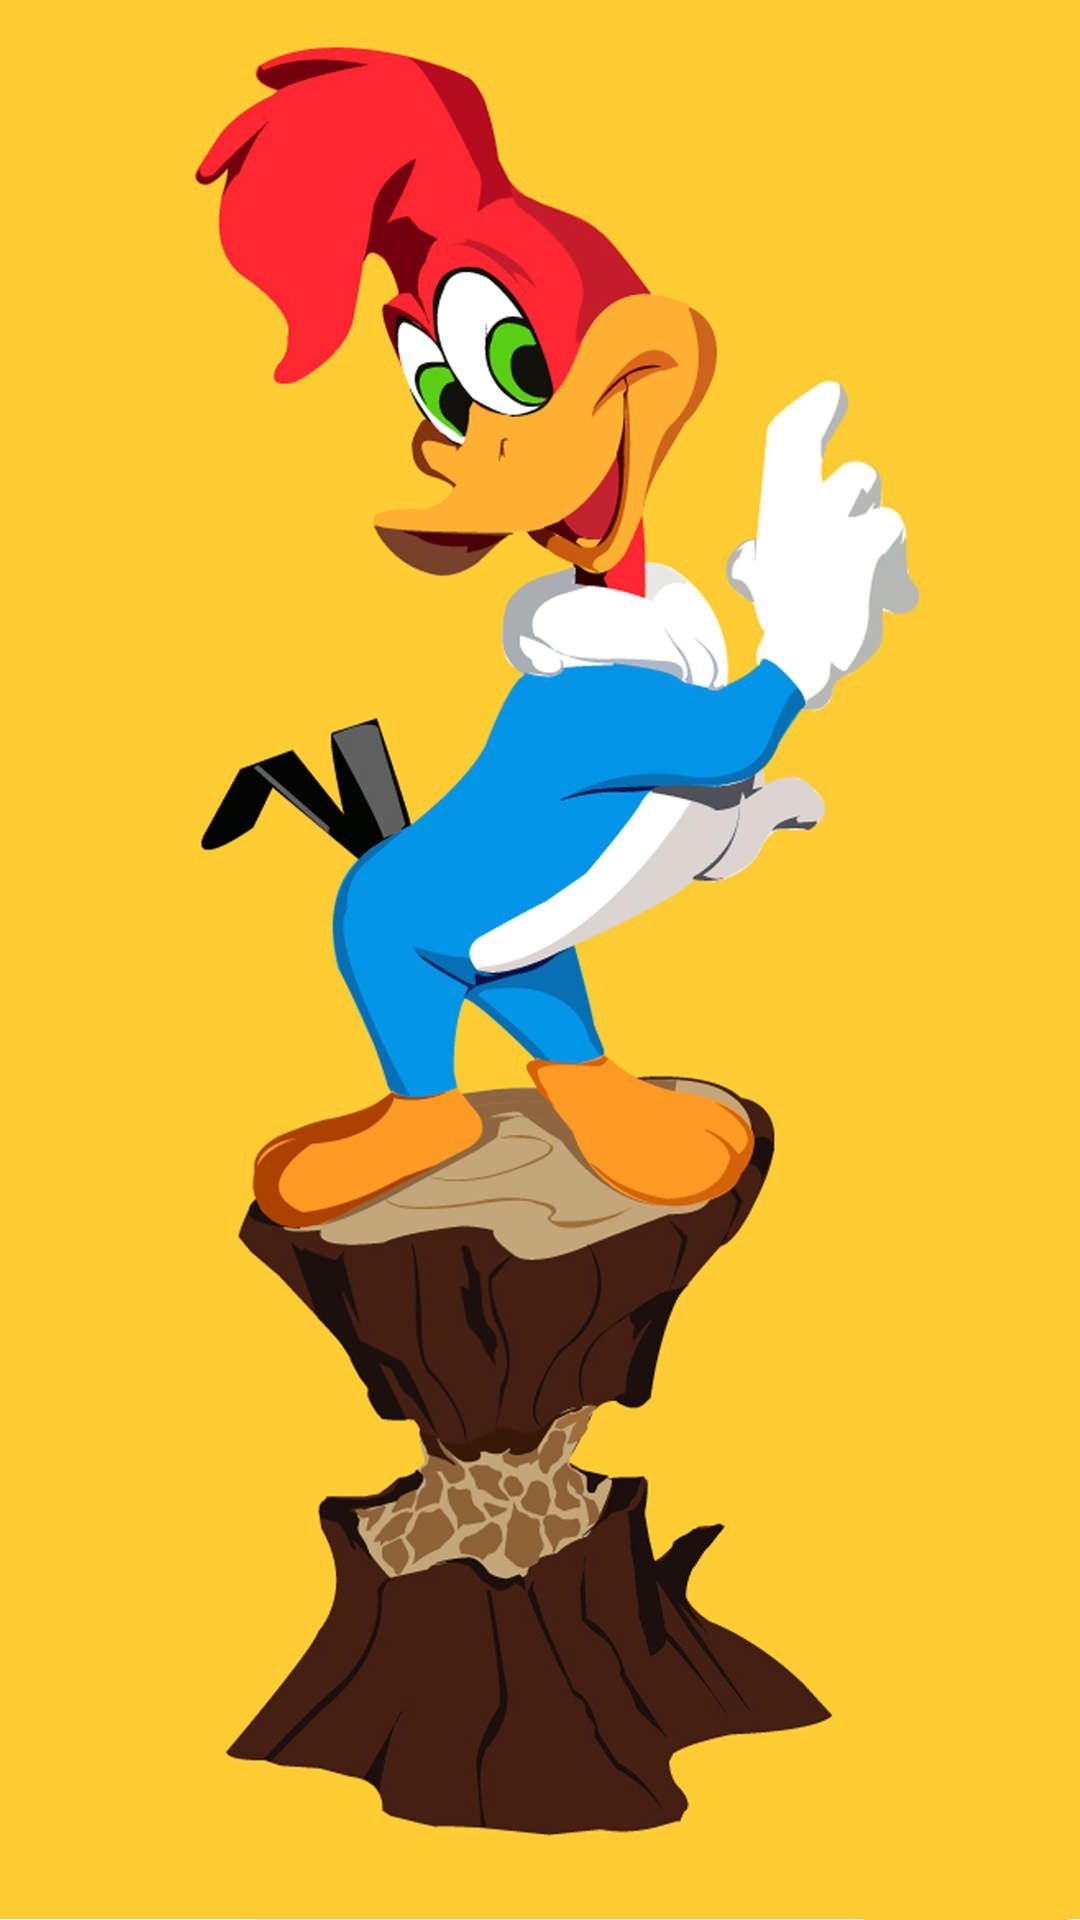 Woody Woodpecker, Cartoon wallpapers, Colorful illustration, Funny character, 1080x1920 Full HD Phone